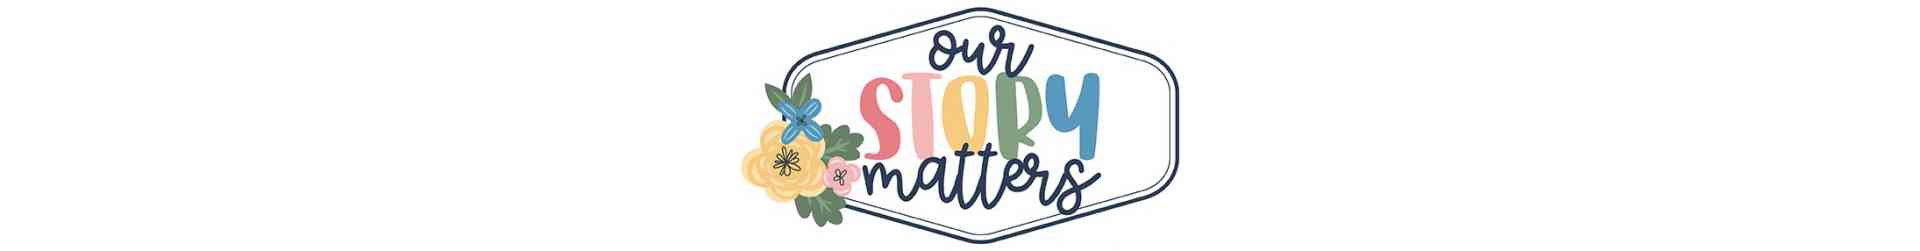 Our Story Matters